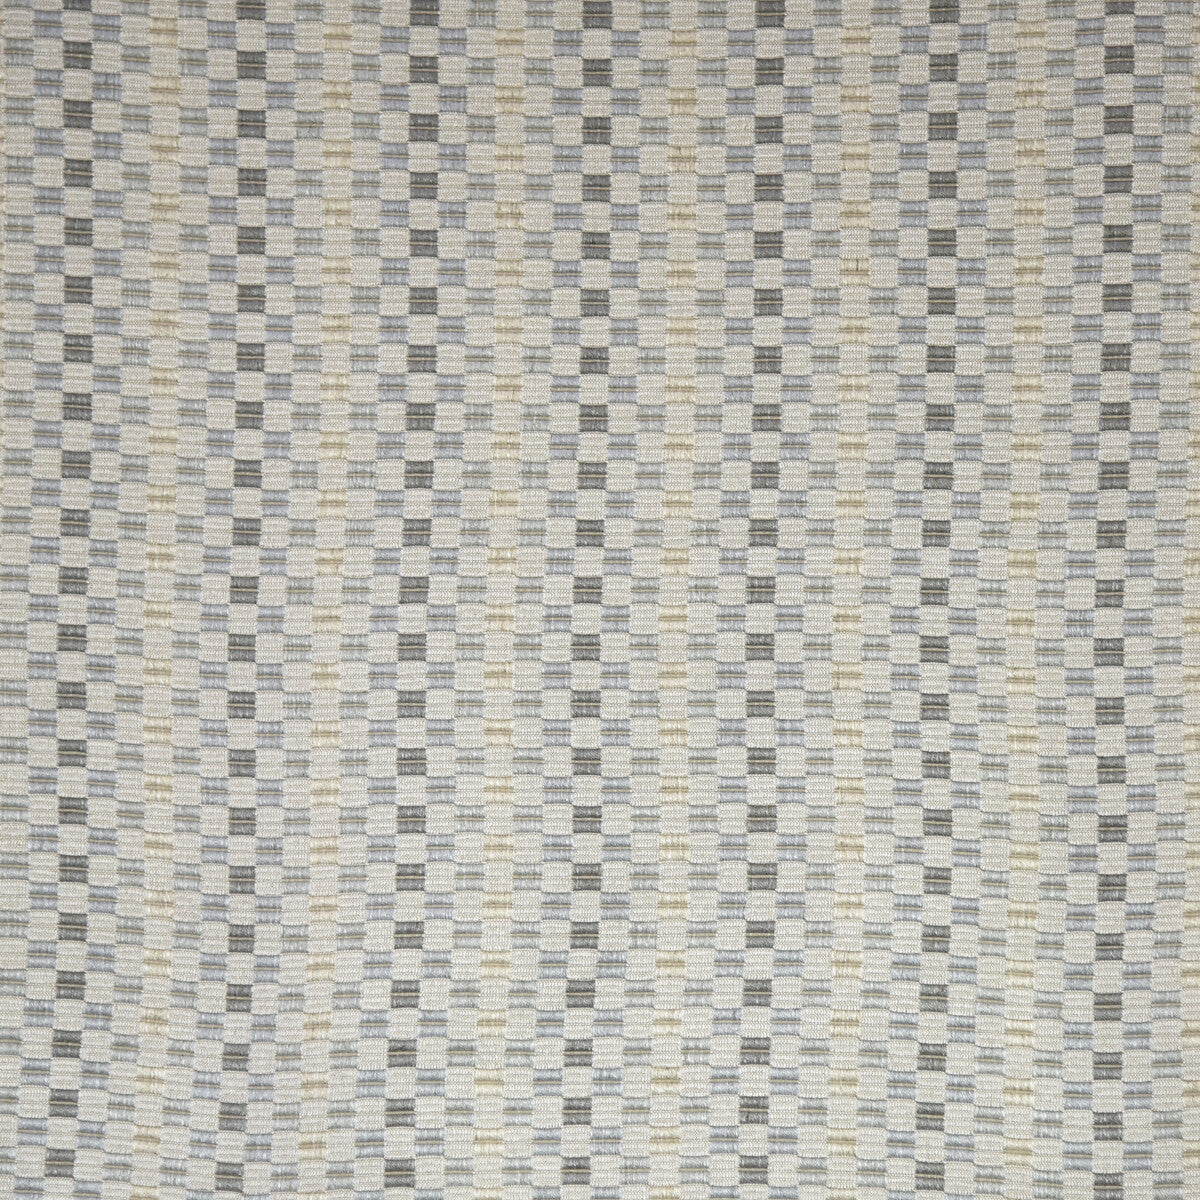 Vernazza fabric in chambray color - pattern 35766.1615.0 - by Kravet Couture in the Modern Colors-Sojourn Collection collection